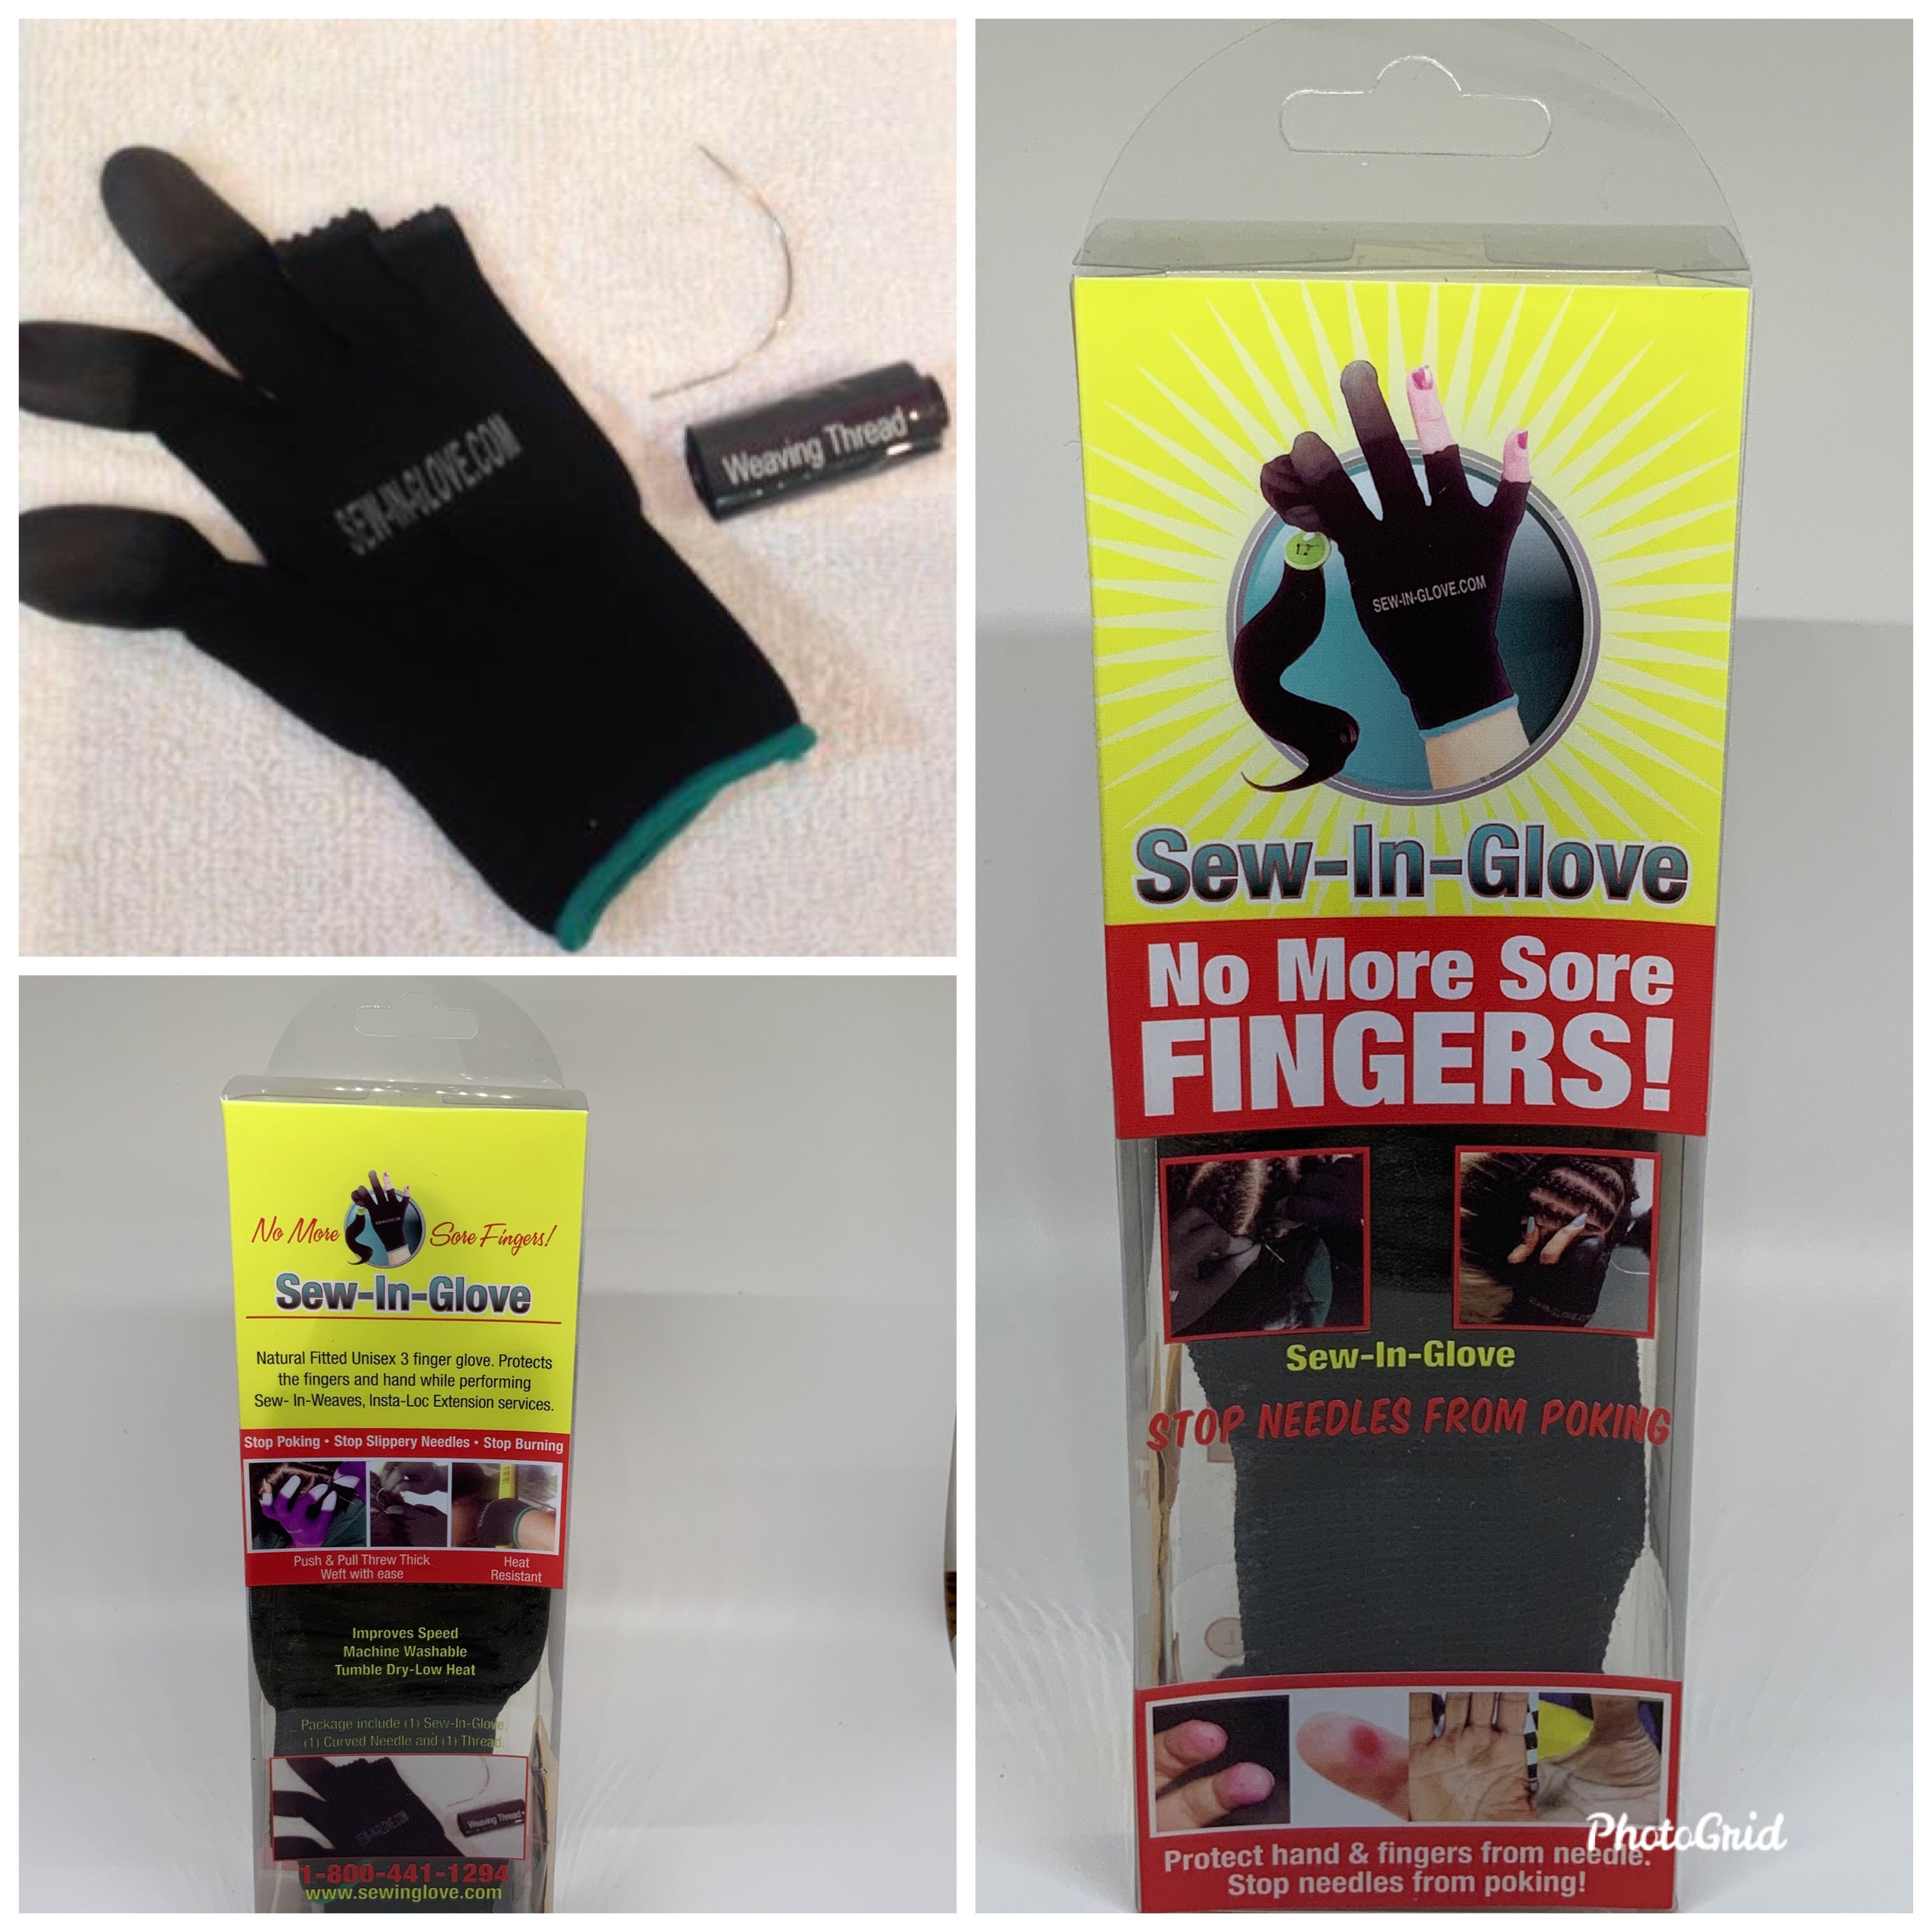 Insta Loc Glove with 0.5 Double Prong Needle.– Sew-in-glove